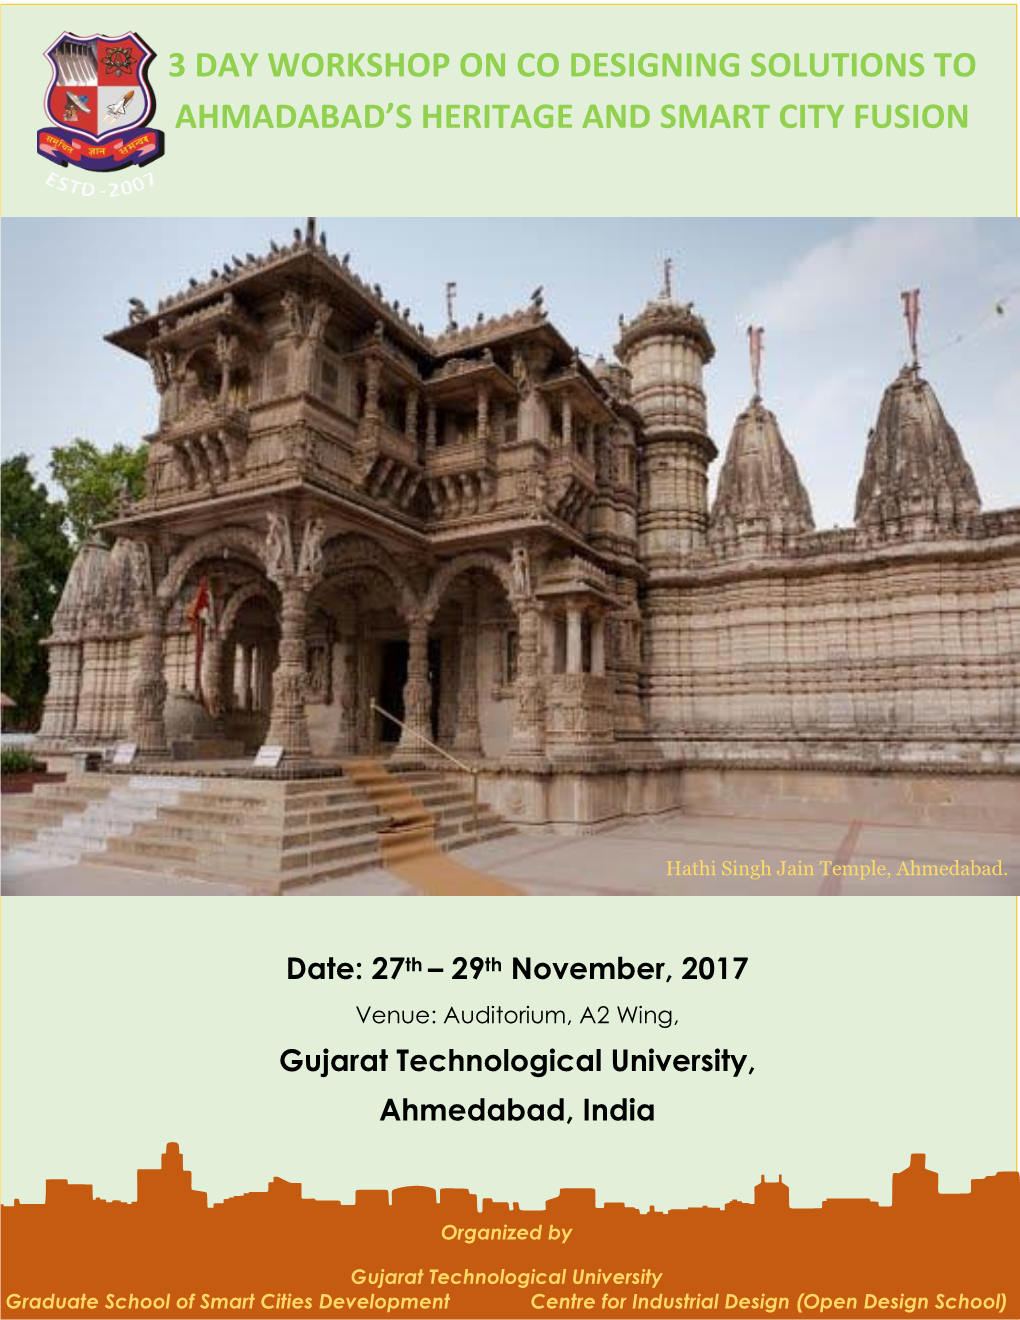 3 Day Workshop on Co Designing Solutions to Ahm Adabad’S Heritage and Smart City Fusion